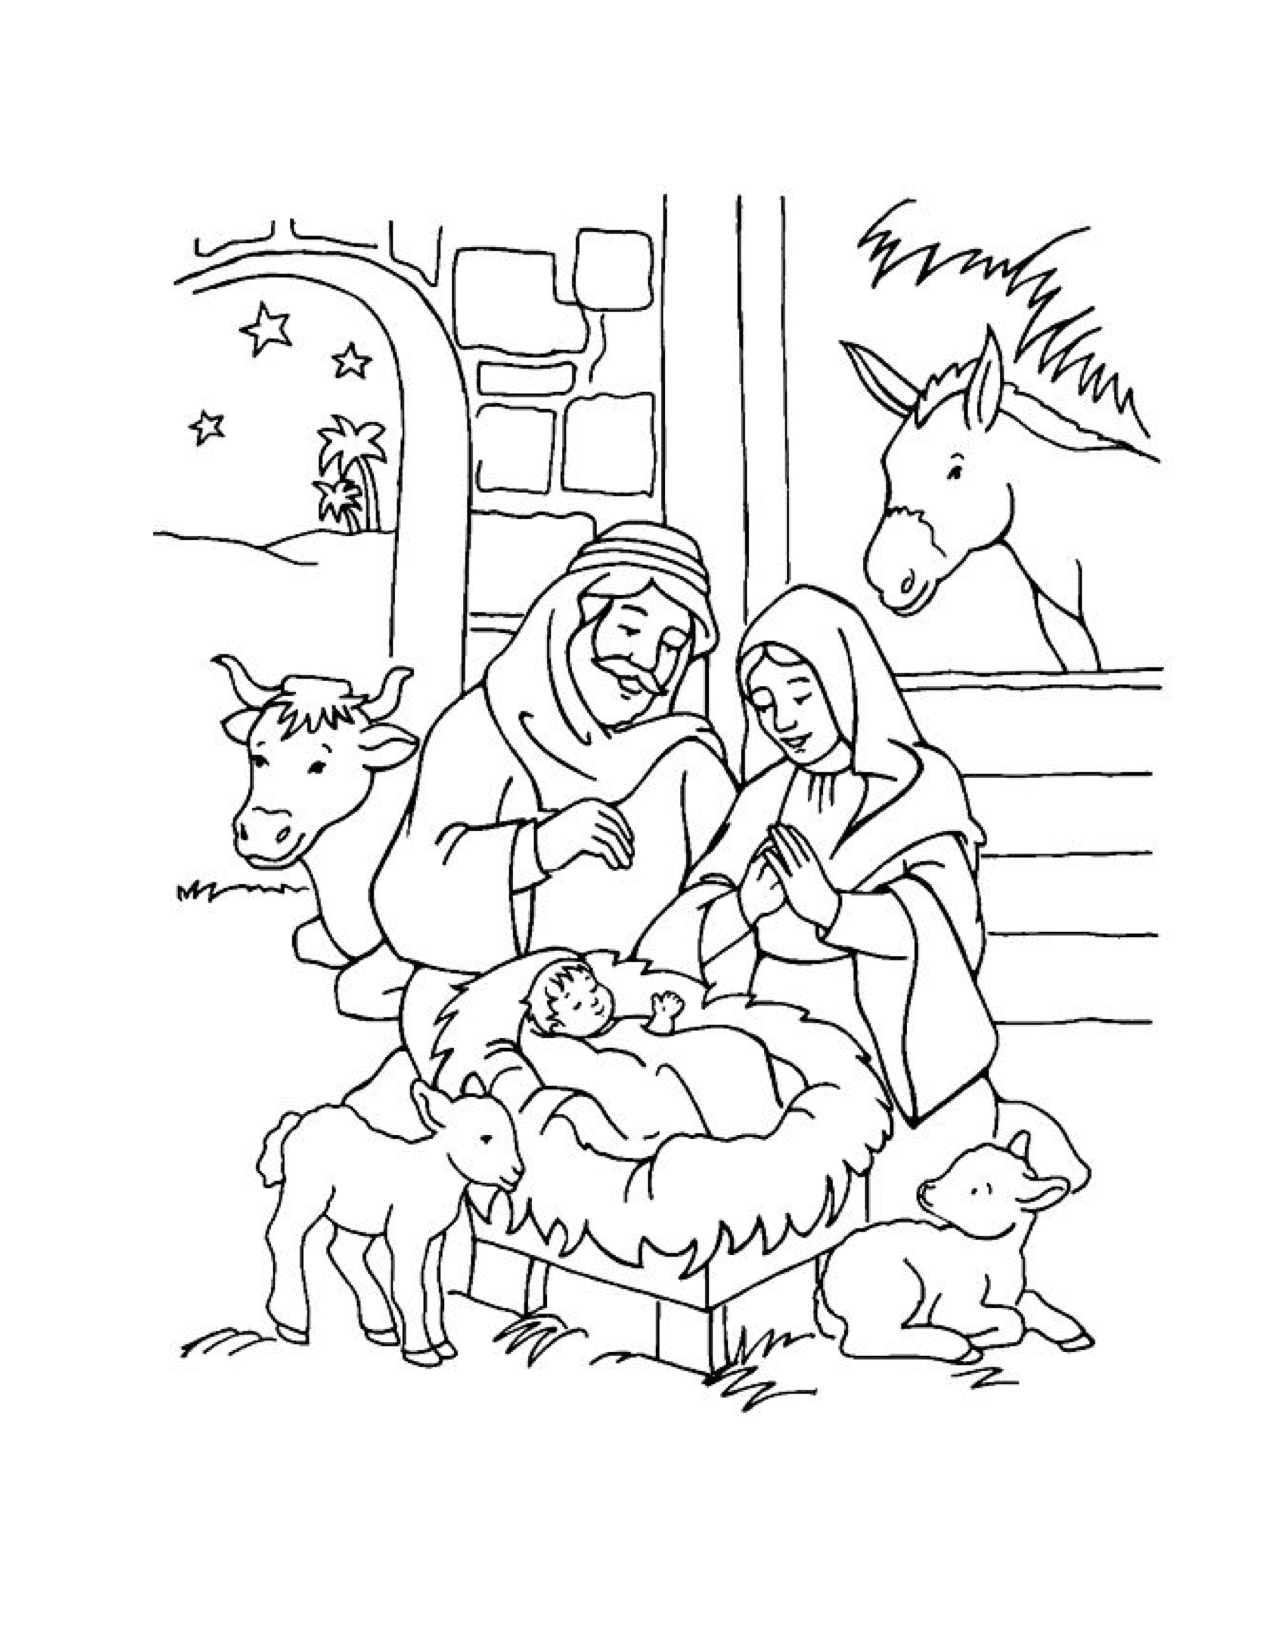 Joseph mary and baby jesus sketch Royalty Free Vector Image